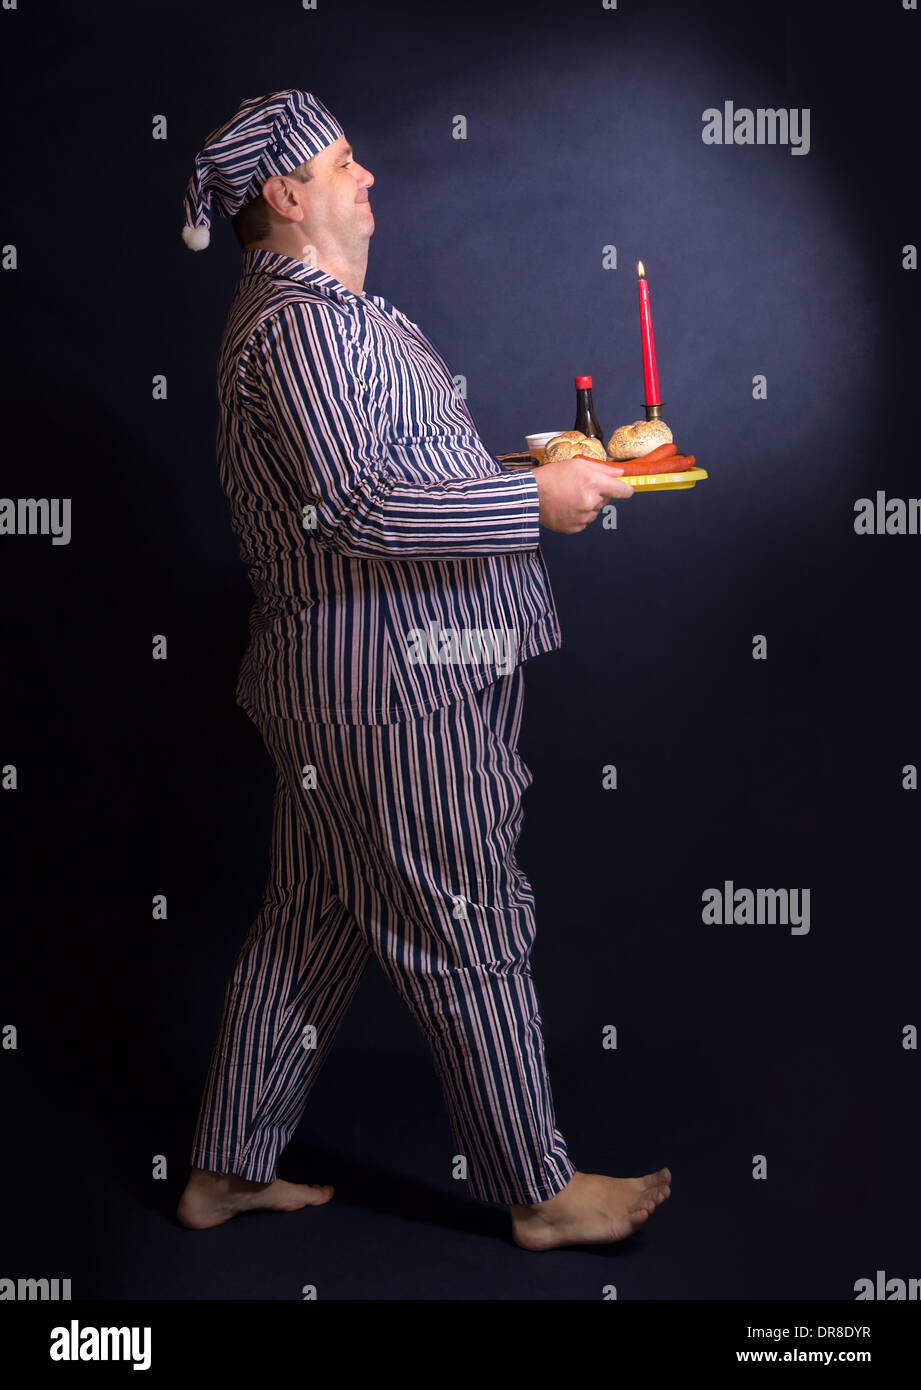 Obese man carries a tray of food Stock Photo